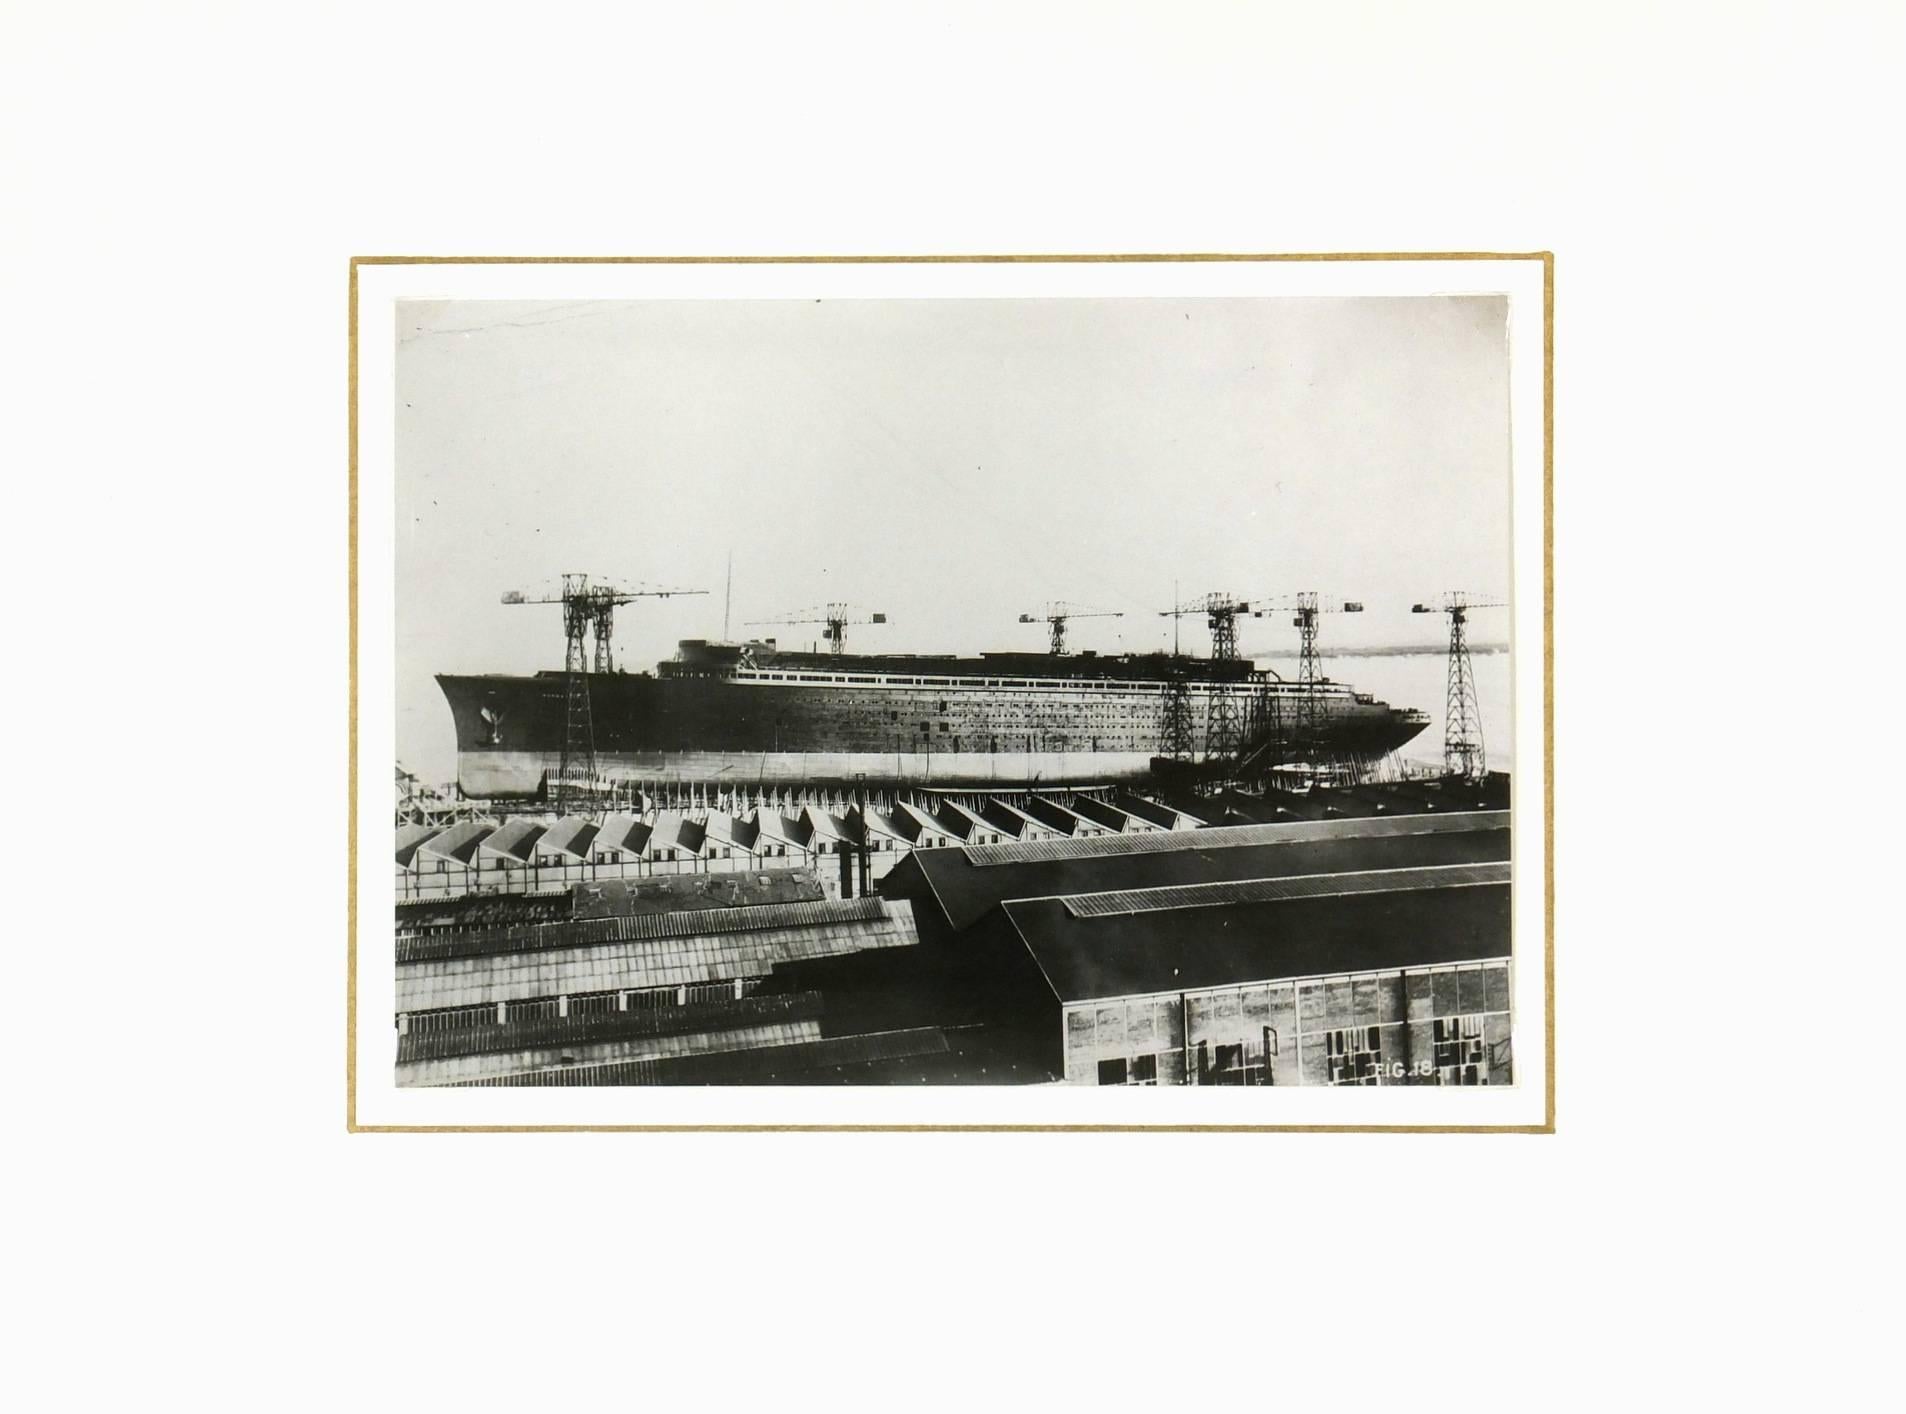 Fabulous industrial French black and white photograph of the construction of the luxury steamer "Le Normandie".

Original one-of-a-kind artwork on paper displayed on a white mat with a gold border. Mat fits a standard-size frame. Archival